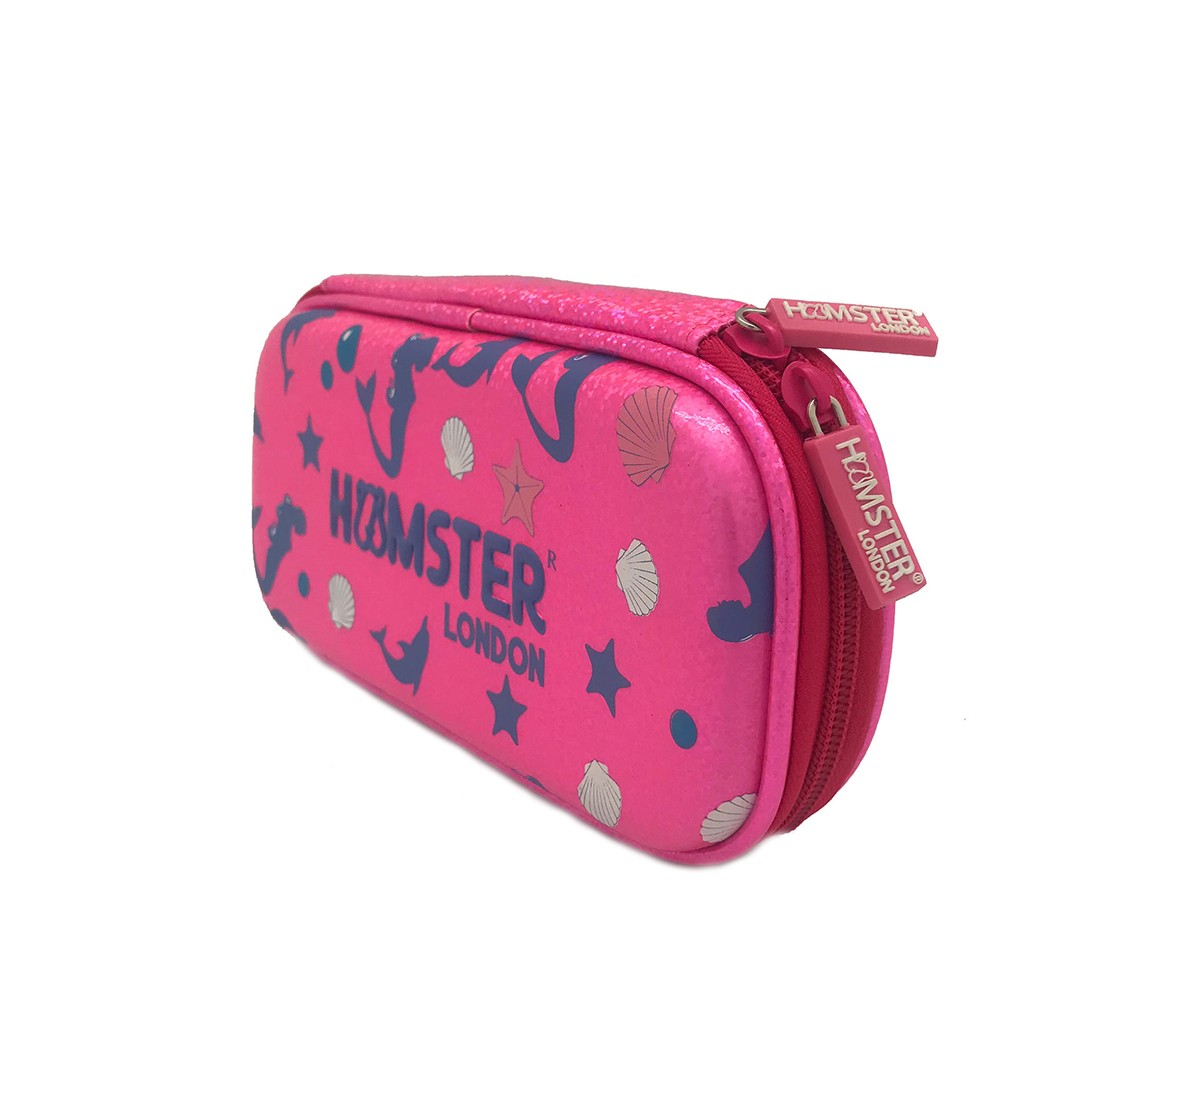 Hamster London Small Mermaid Stationery Hardcase for age 3Y+ (Pink)